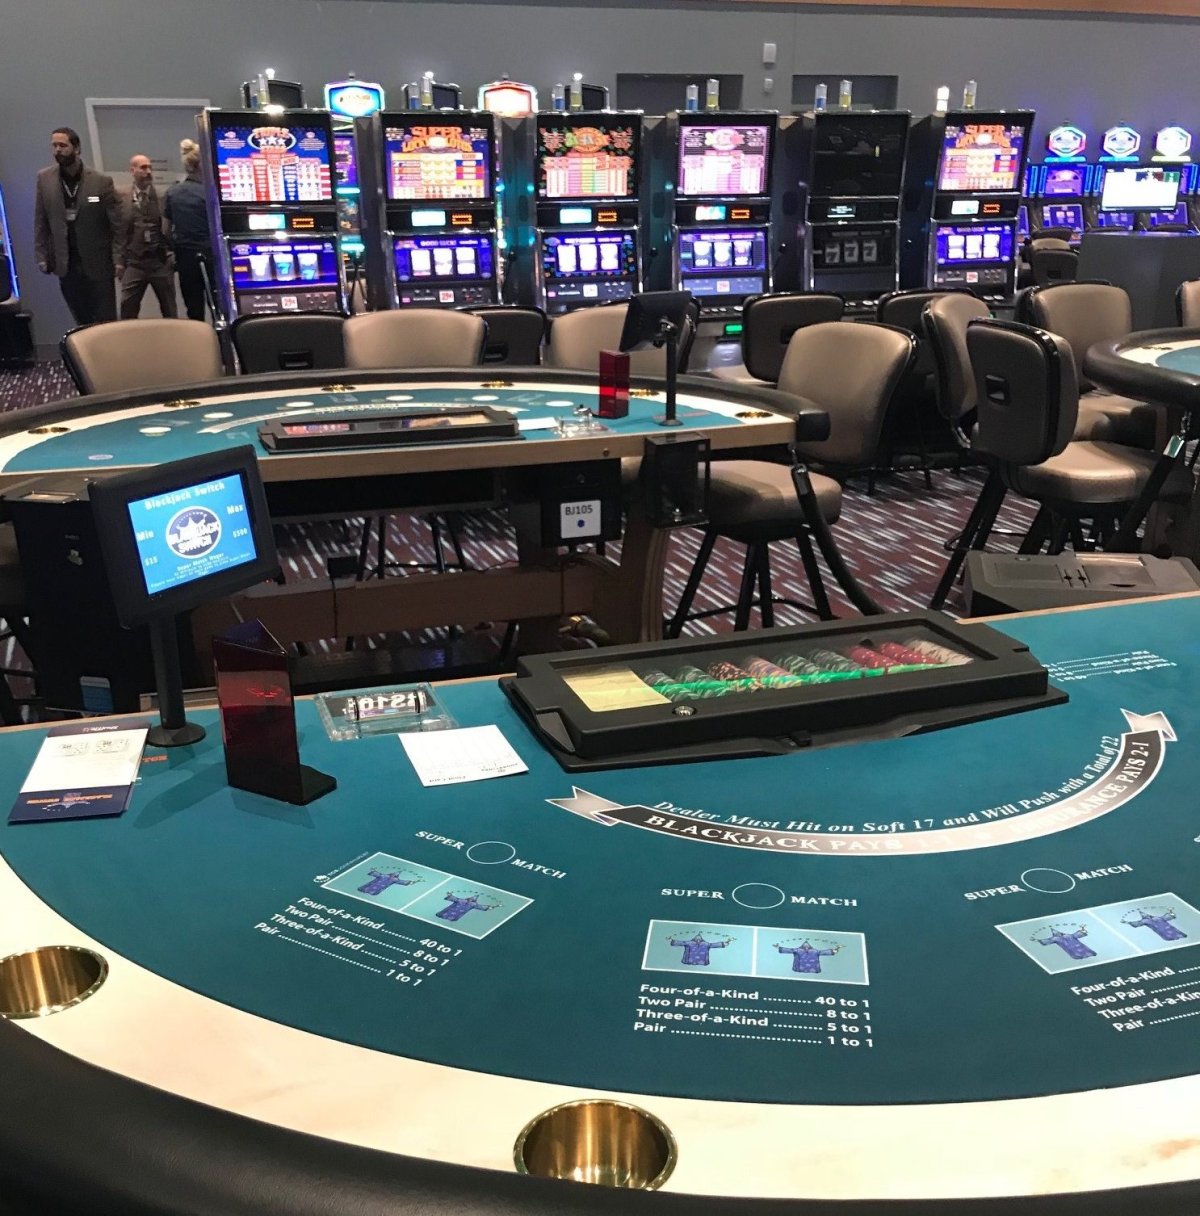 Shorelines Casino Peterborough has generated more than $7M in non-tax gaming revenue for the city since it opened in October 2018, the OLG says.